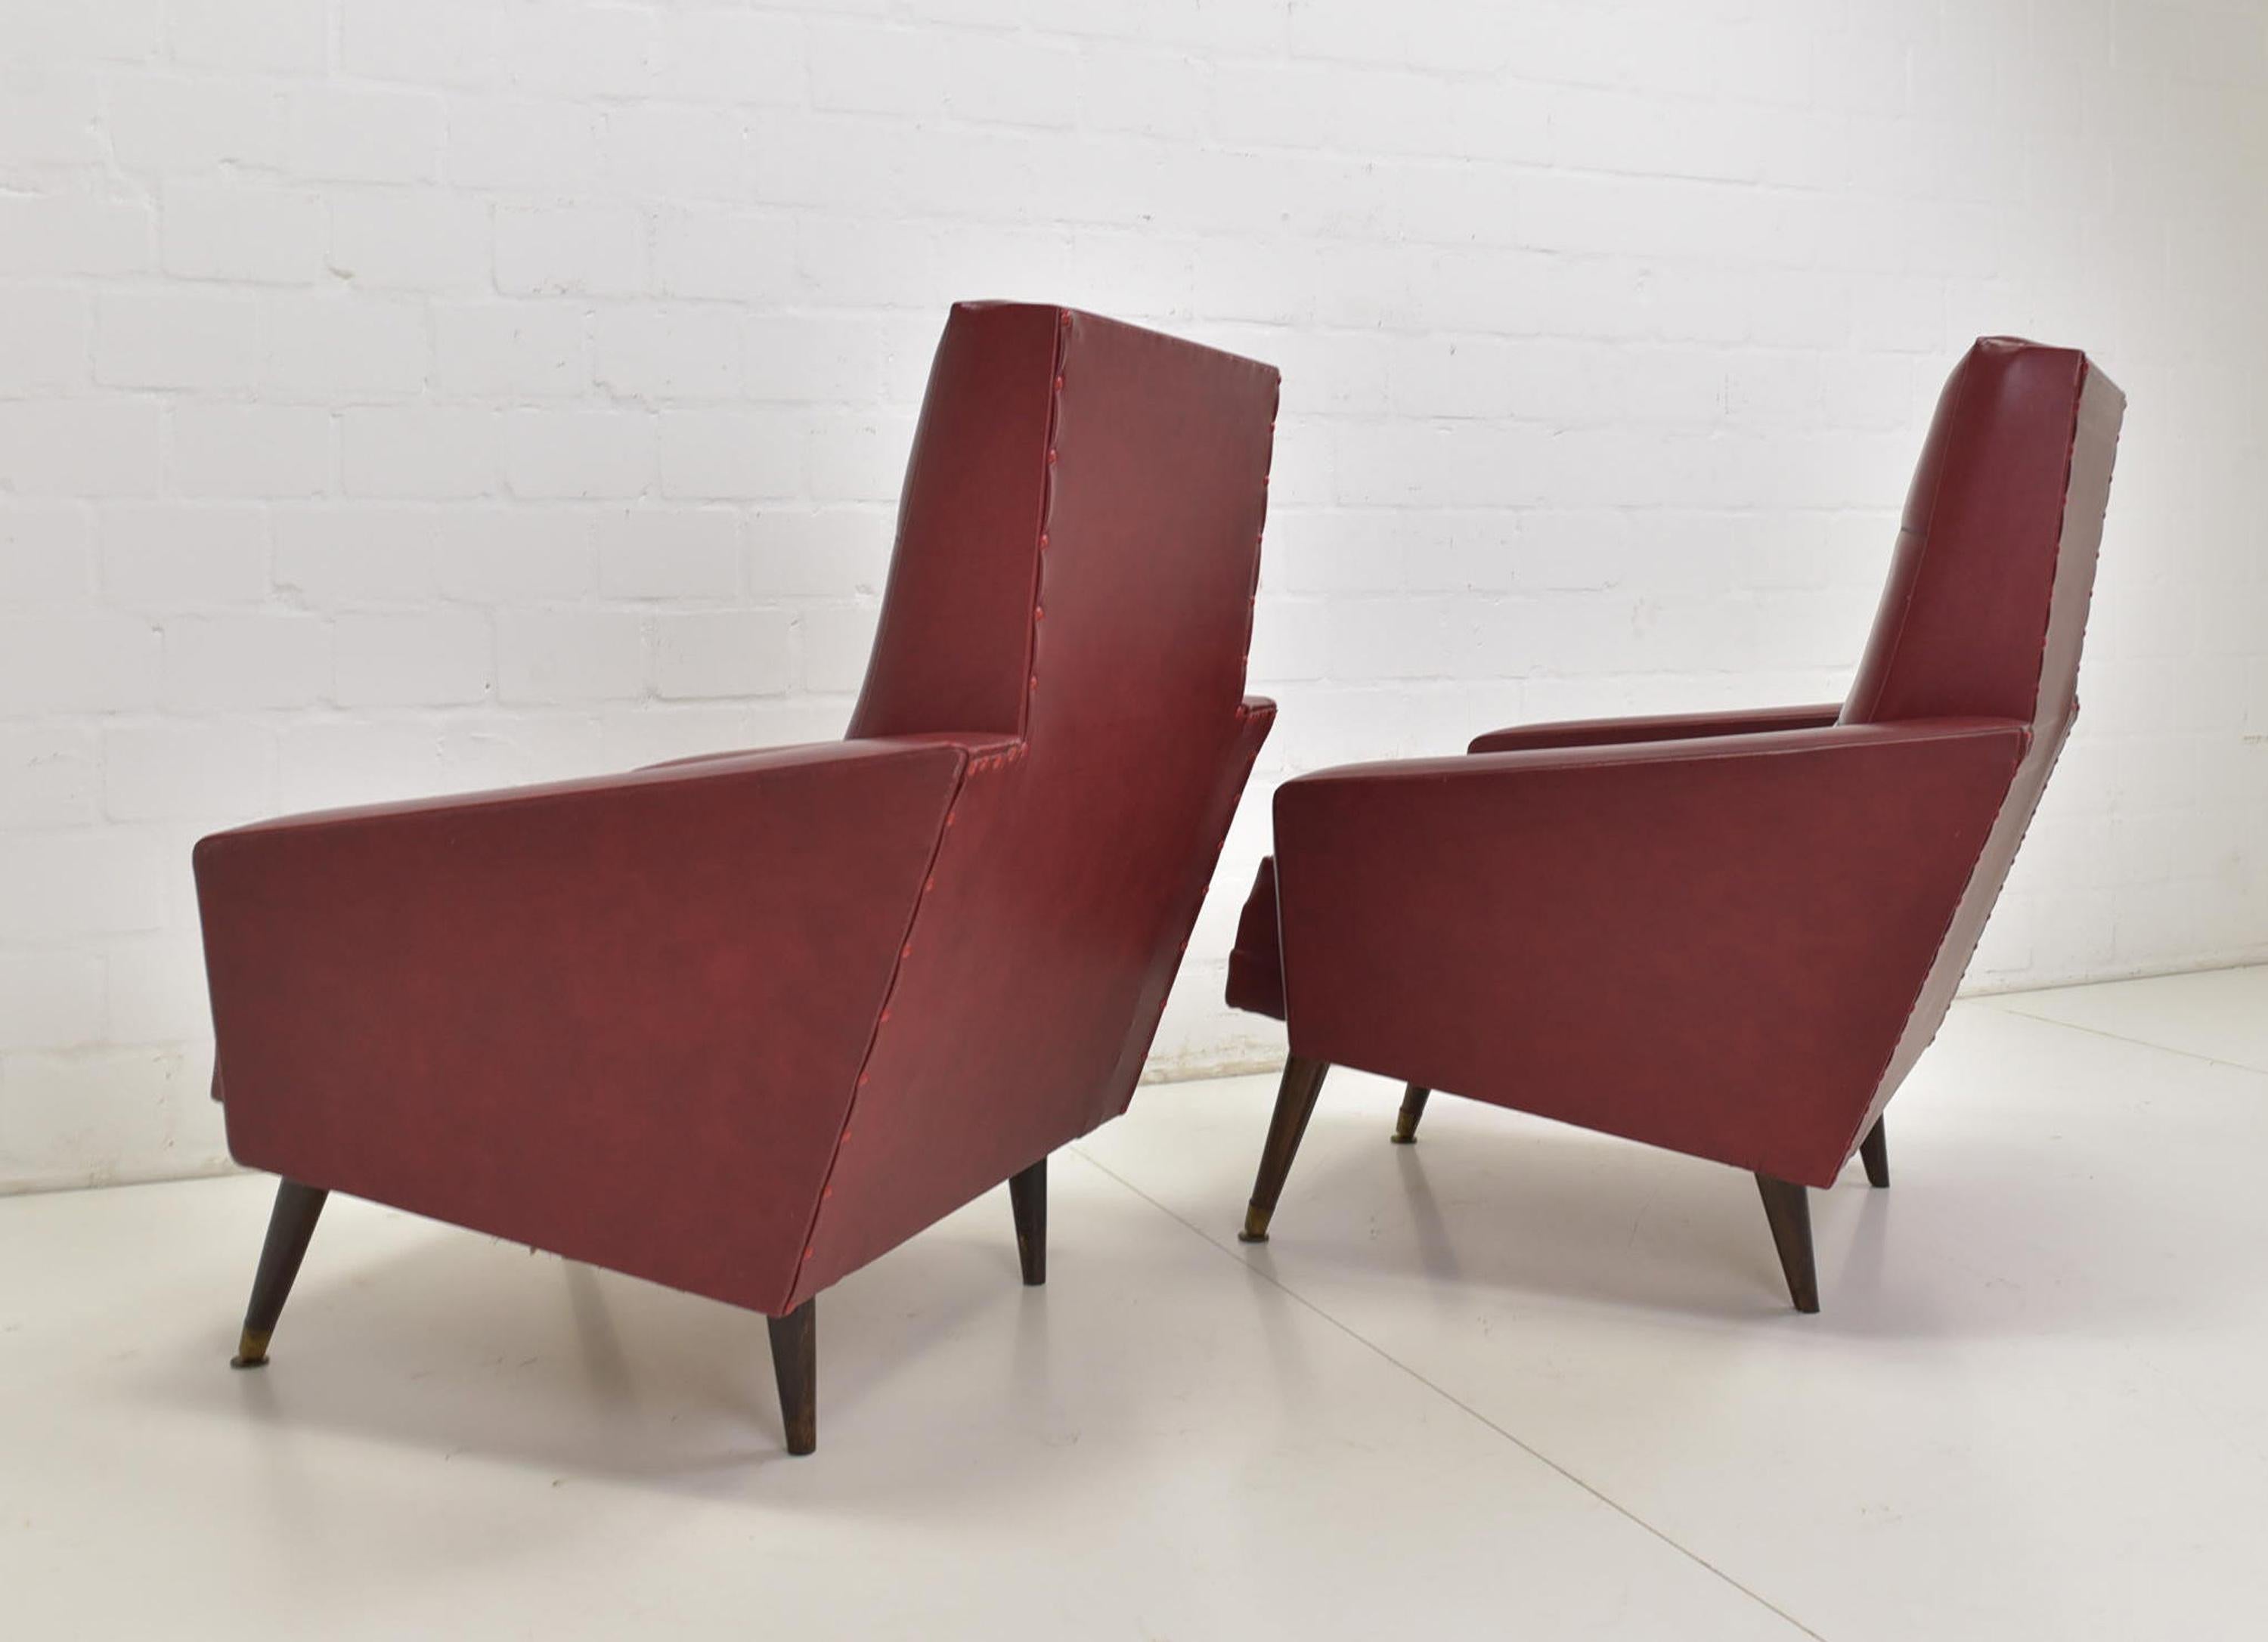 Pair of Vintage Armchairs 2x Lounge Chair / Red Skai Rockabilly Chairs, 50s 60s For Sale 1